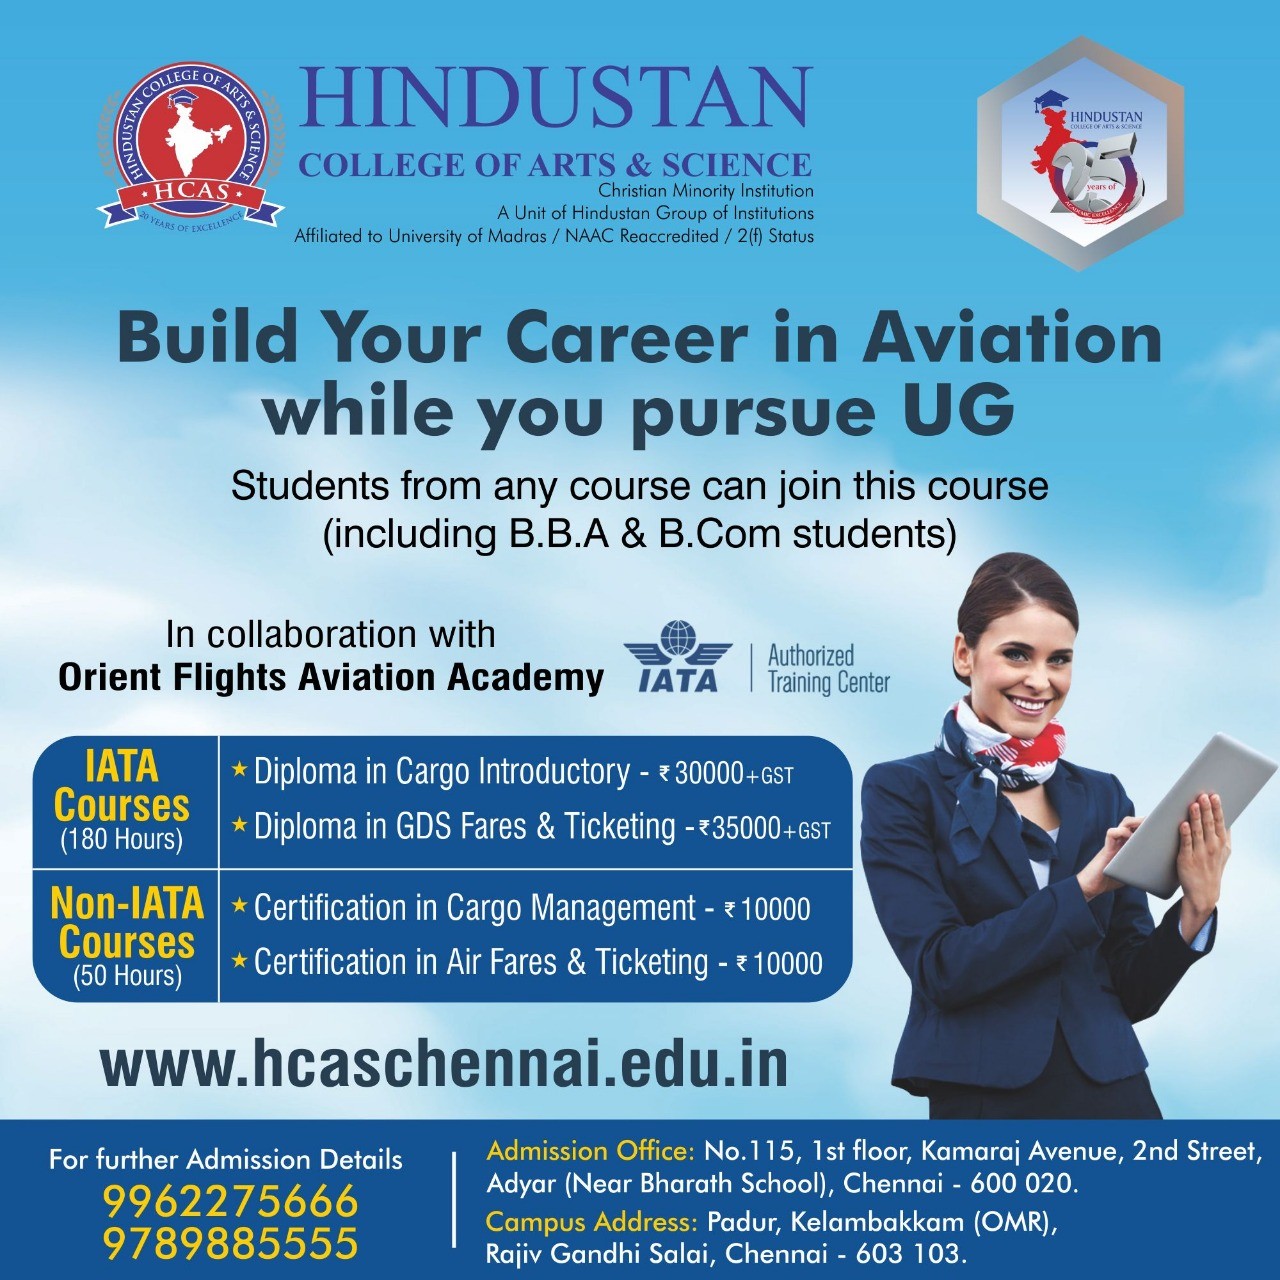 Buid your career in Aviation while you pursue UG